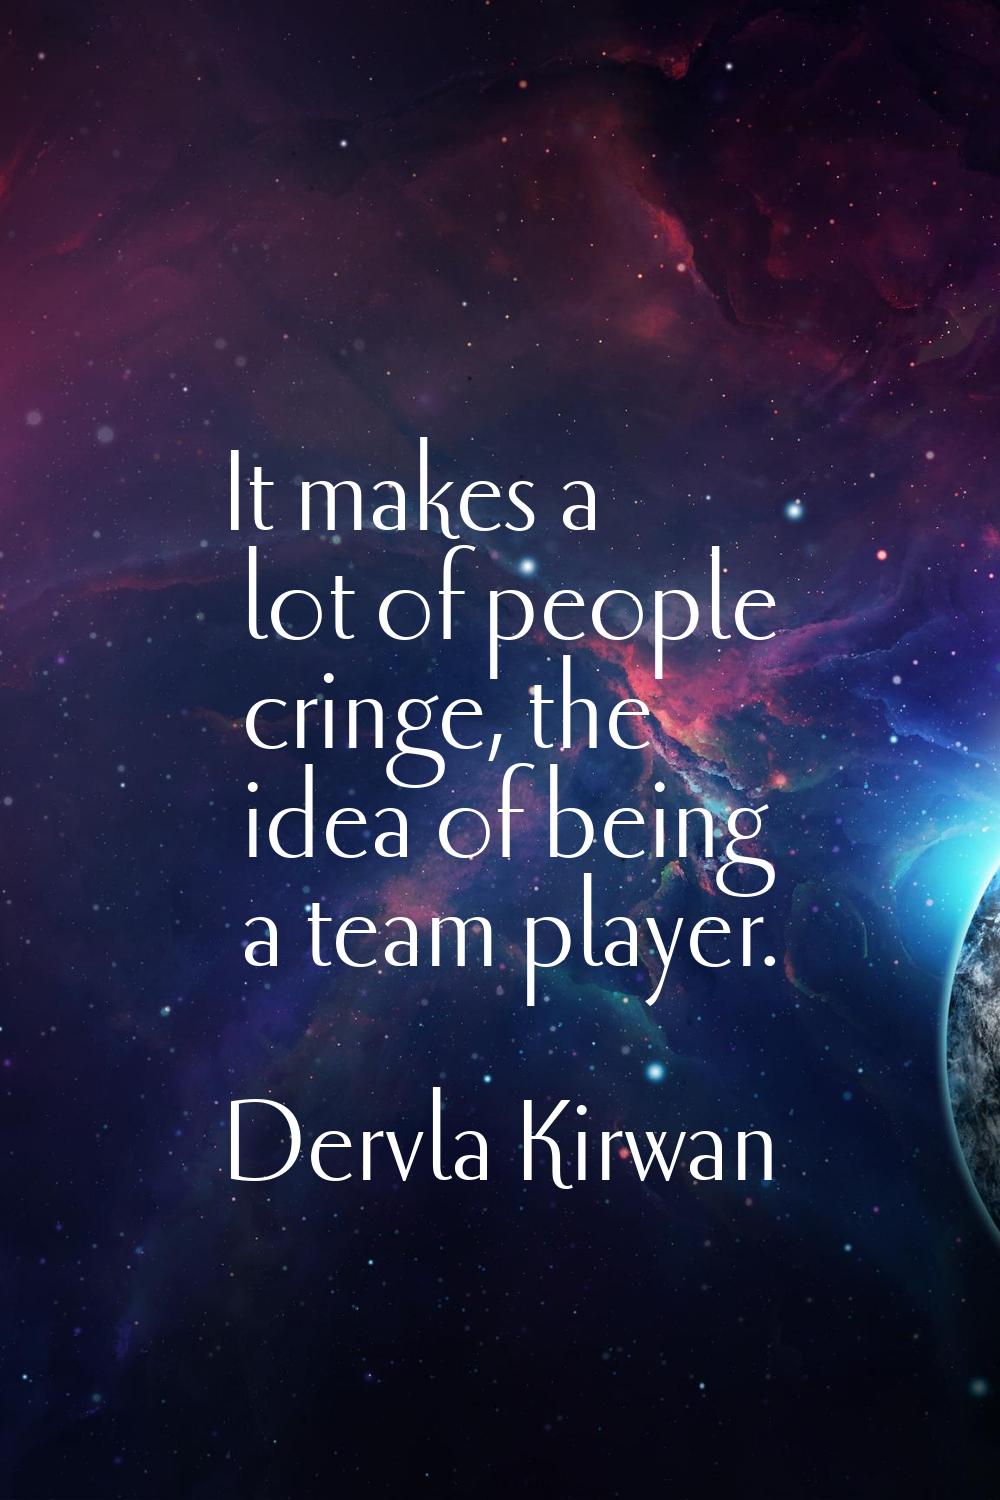 It makes a lot of people cringe, the idea of being a team player.